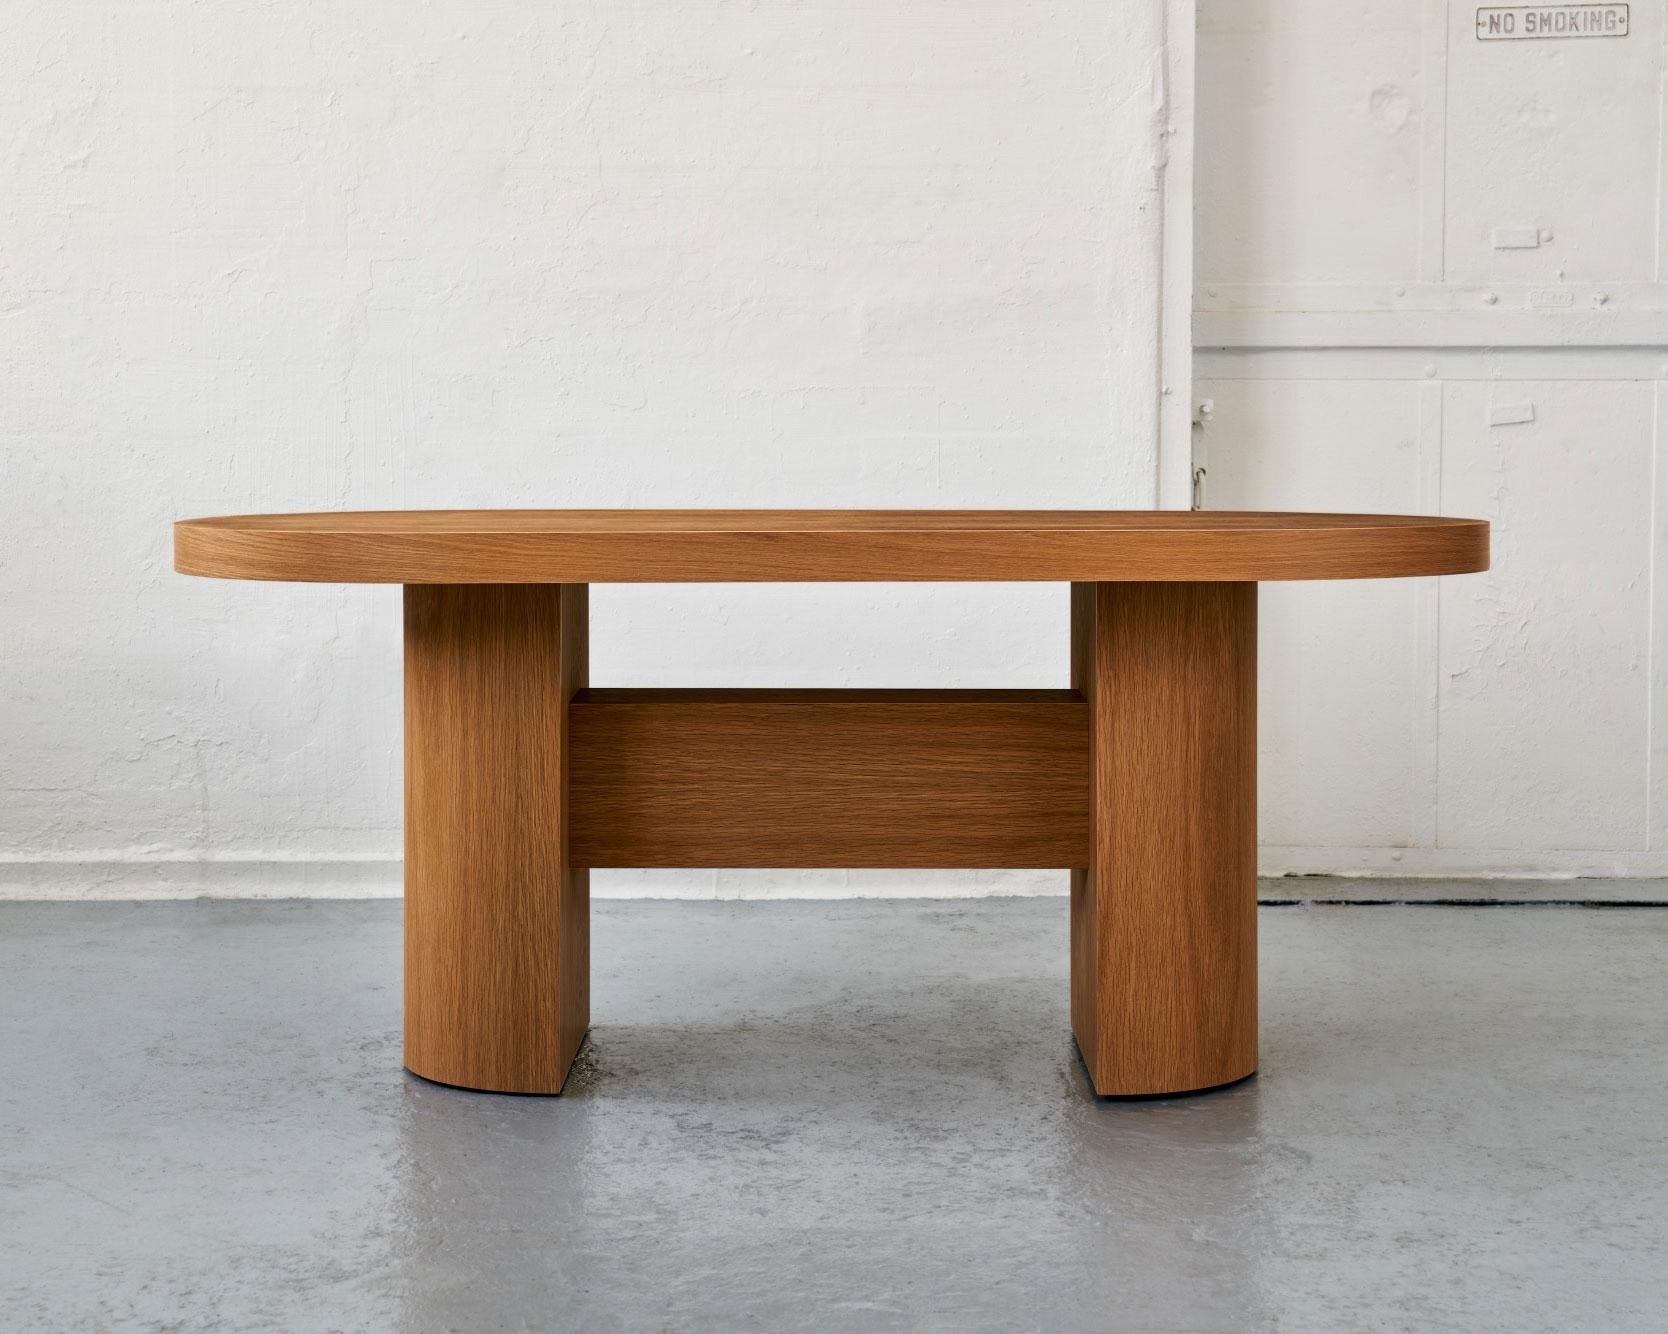 A custom dining table drawing inspiration from both the Brutalist and Memphis design movements. The track dining table is comprised of premium quality curved plywood and real wood veneer. It features an oval top set on two half-round pedestals